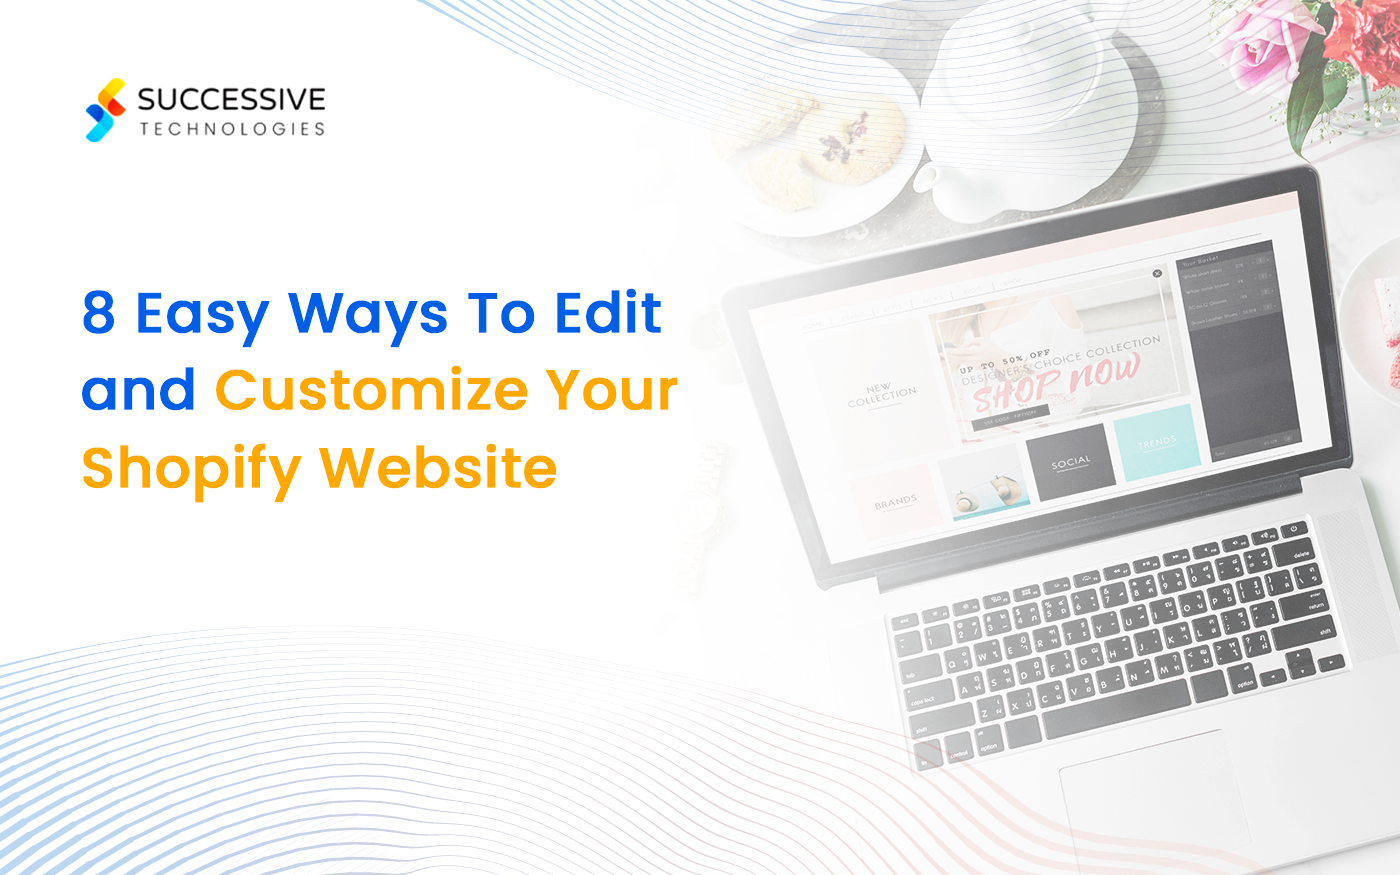 8 Easy Ways To Edit and Customize Shopify Websites